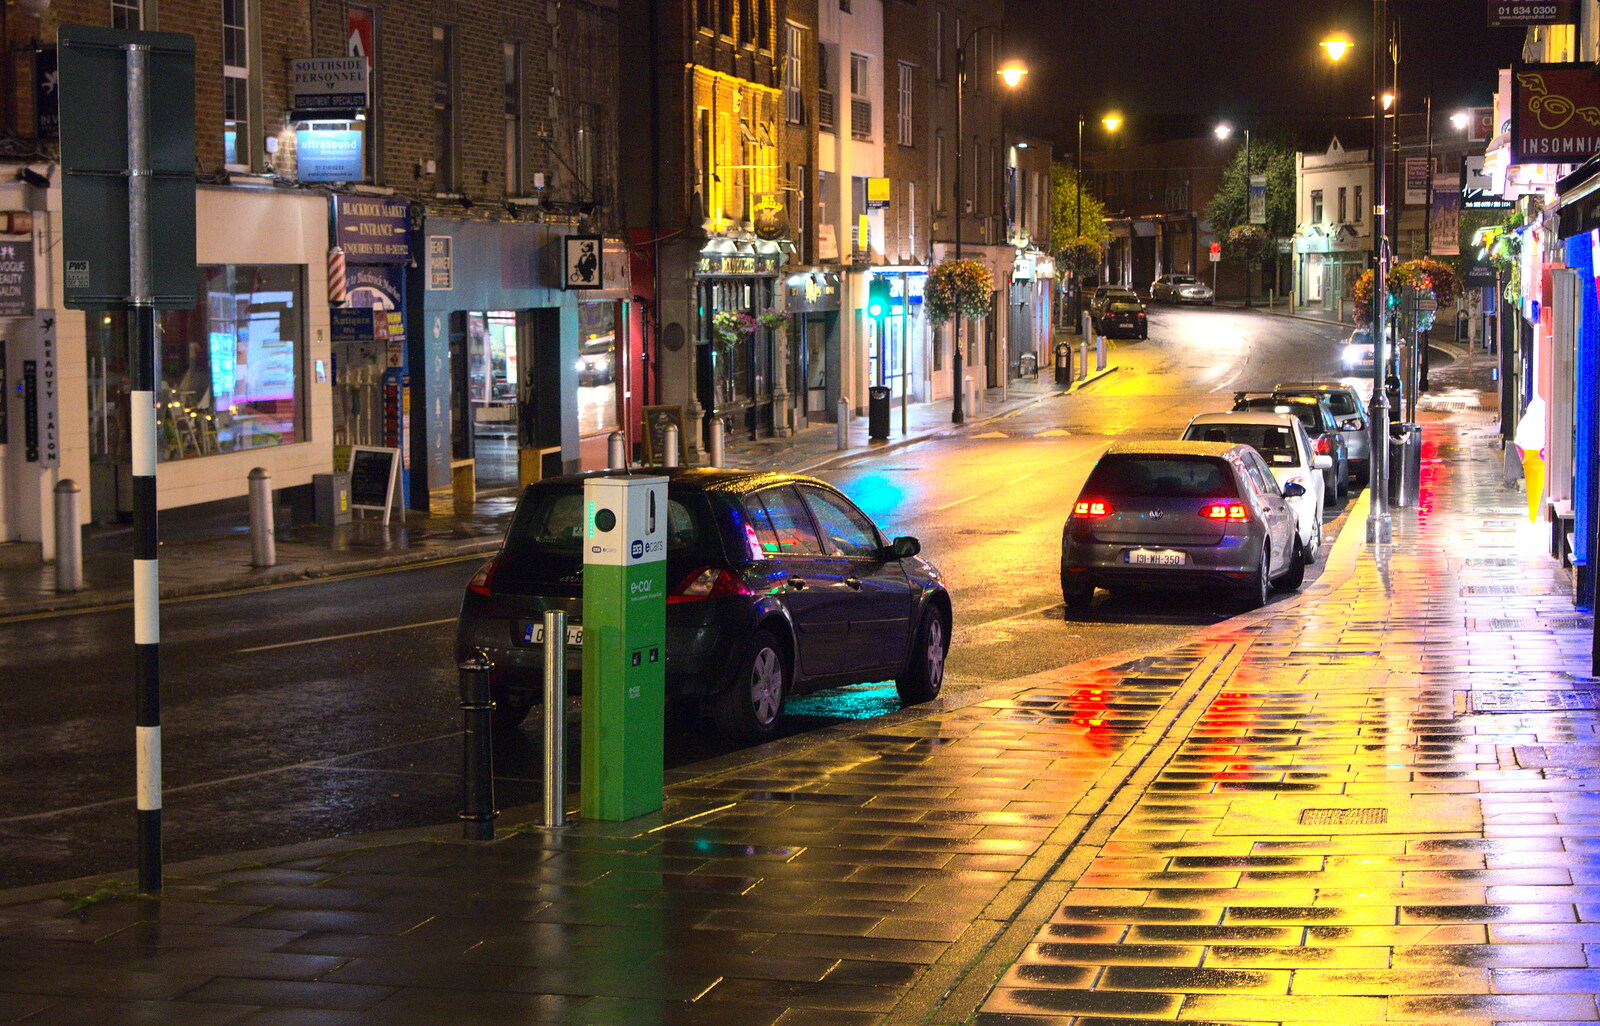 An empty Blackrock high street at night from A Night Out in Dublin, County Dublin, Ireland - 9th August 2014